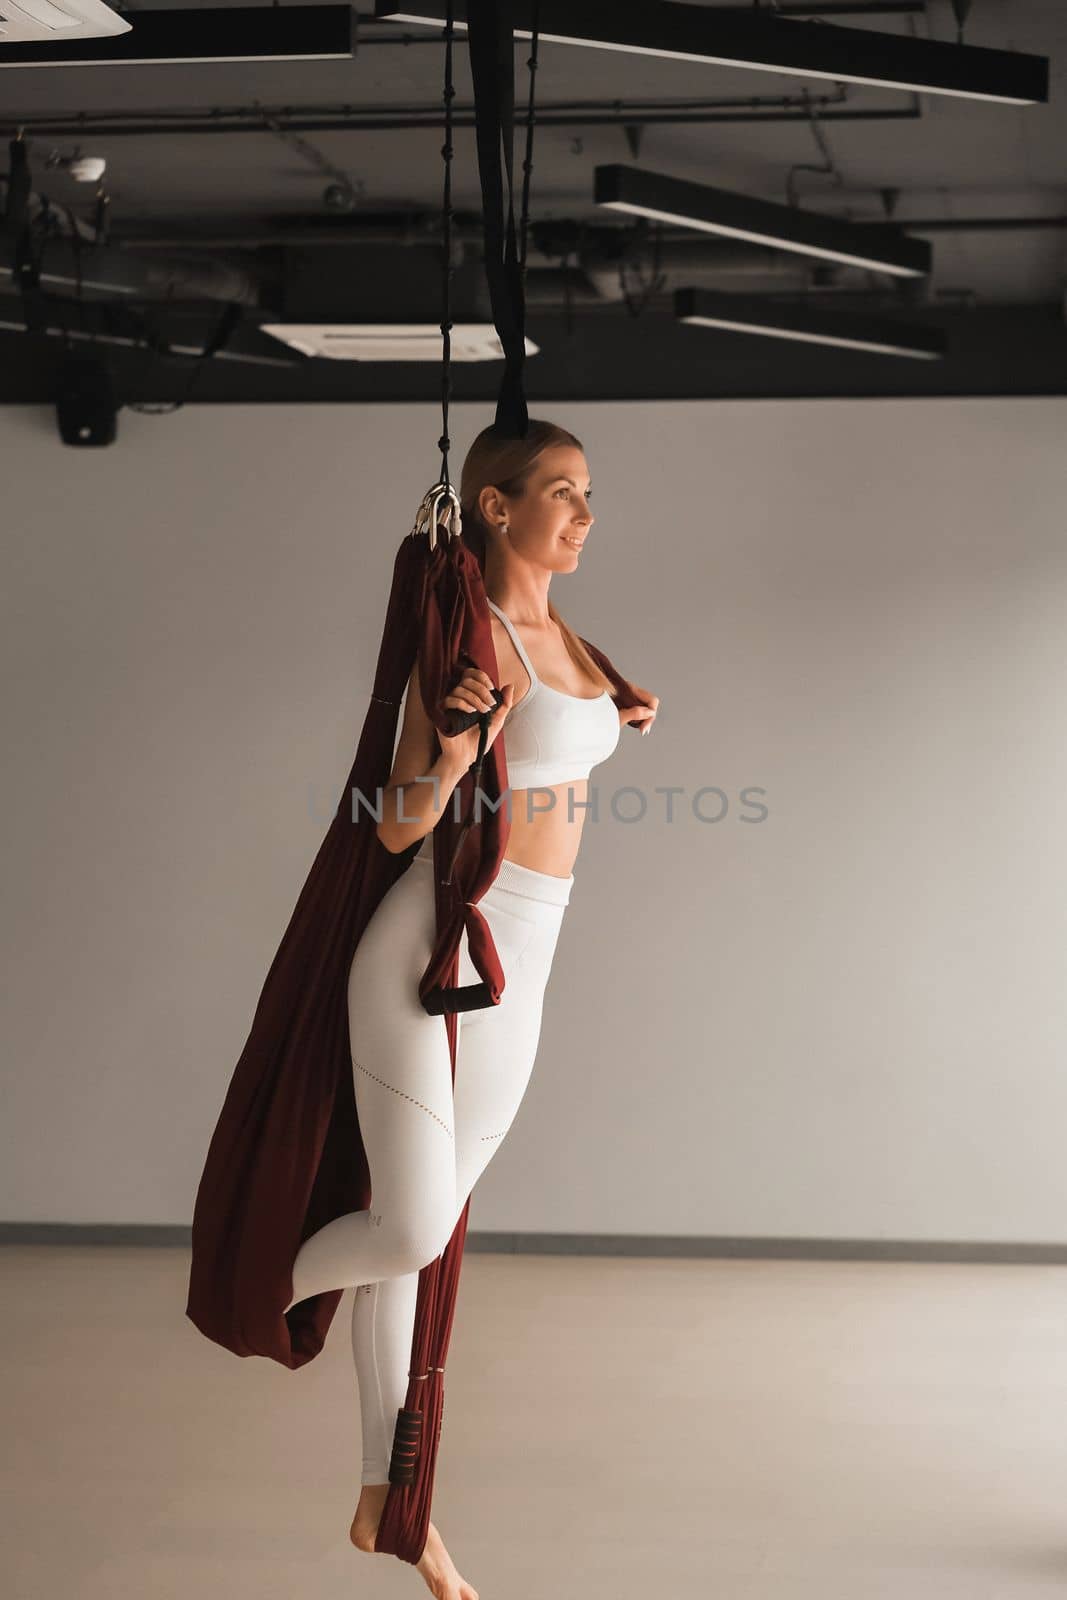 A girl in white sportswear does yoga on a hanging hammock in the fitness room.